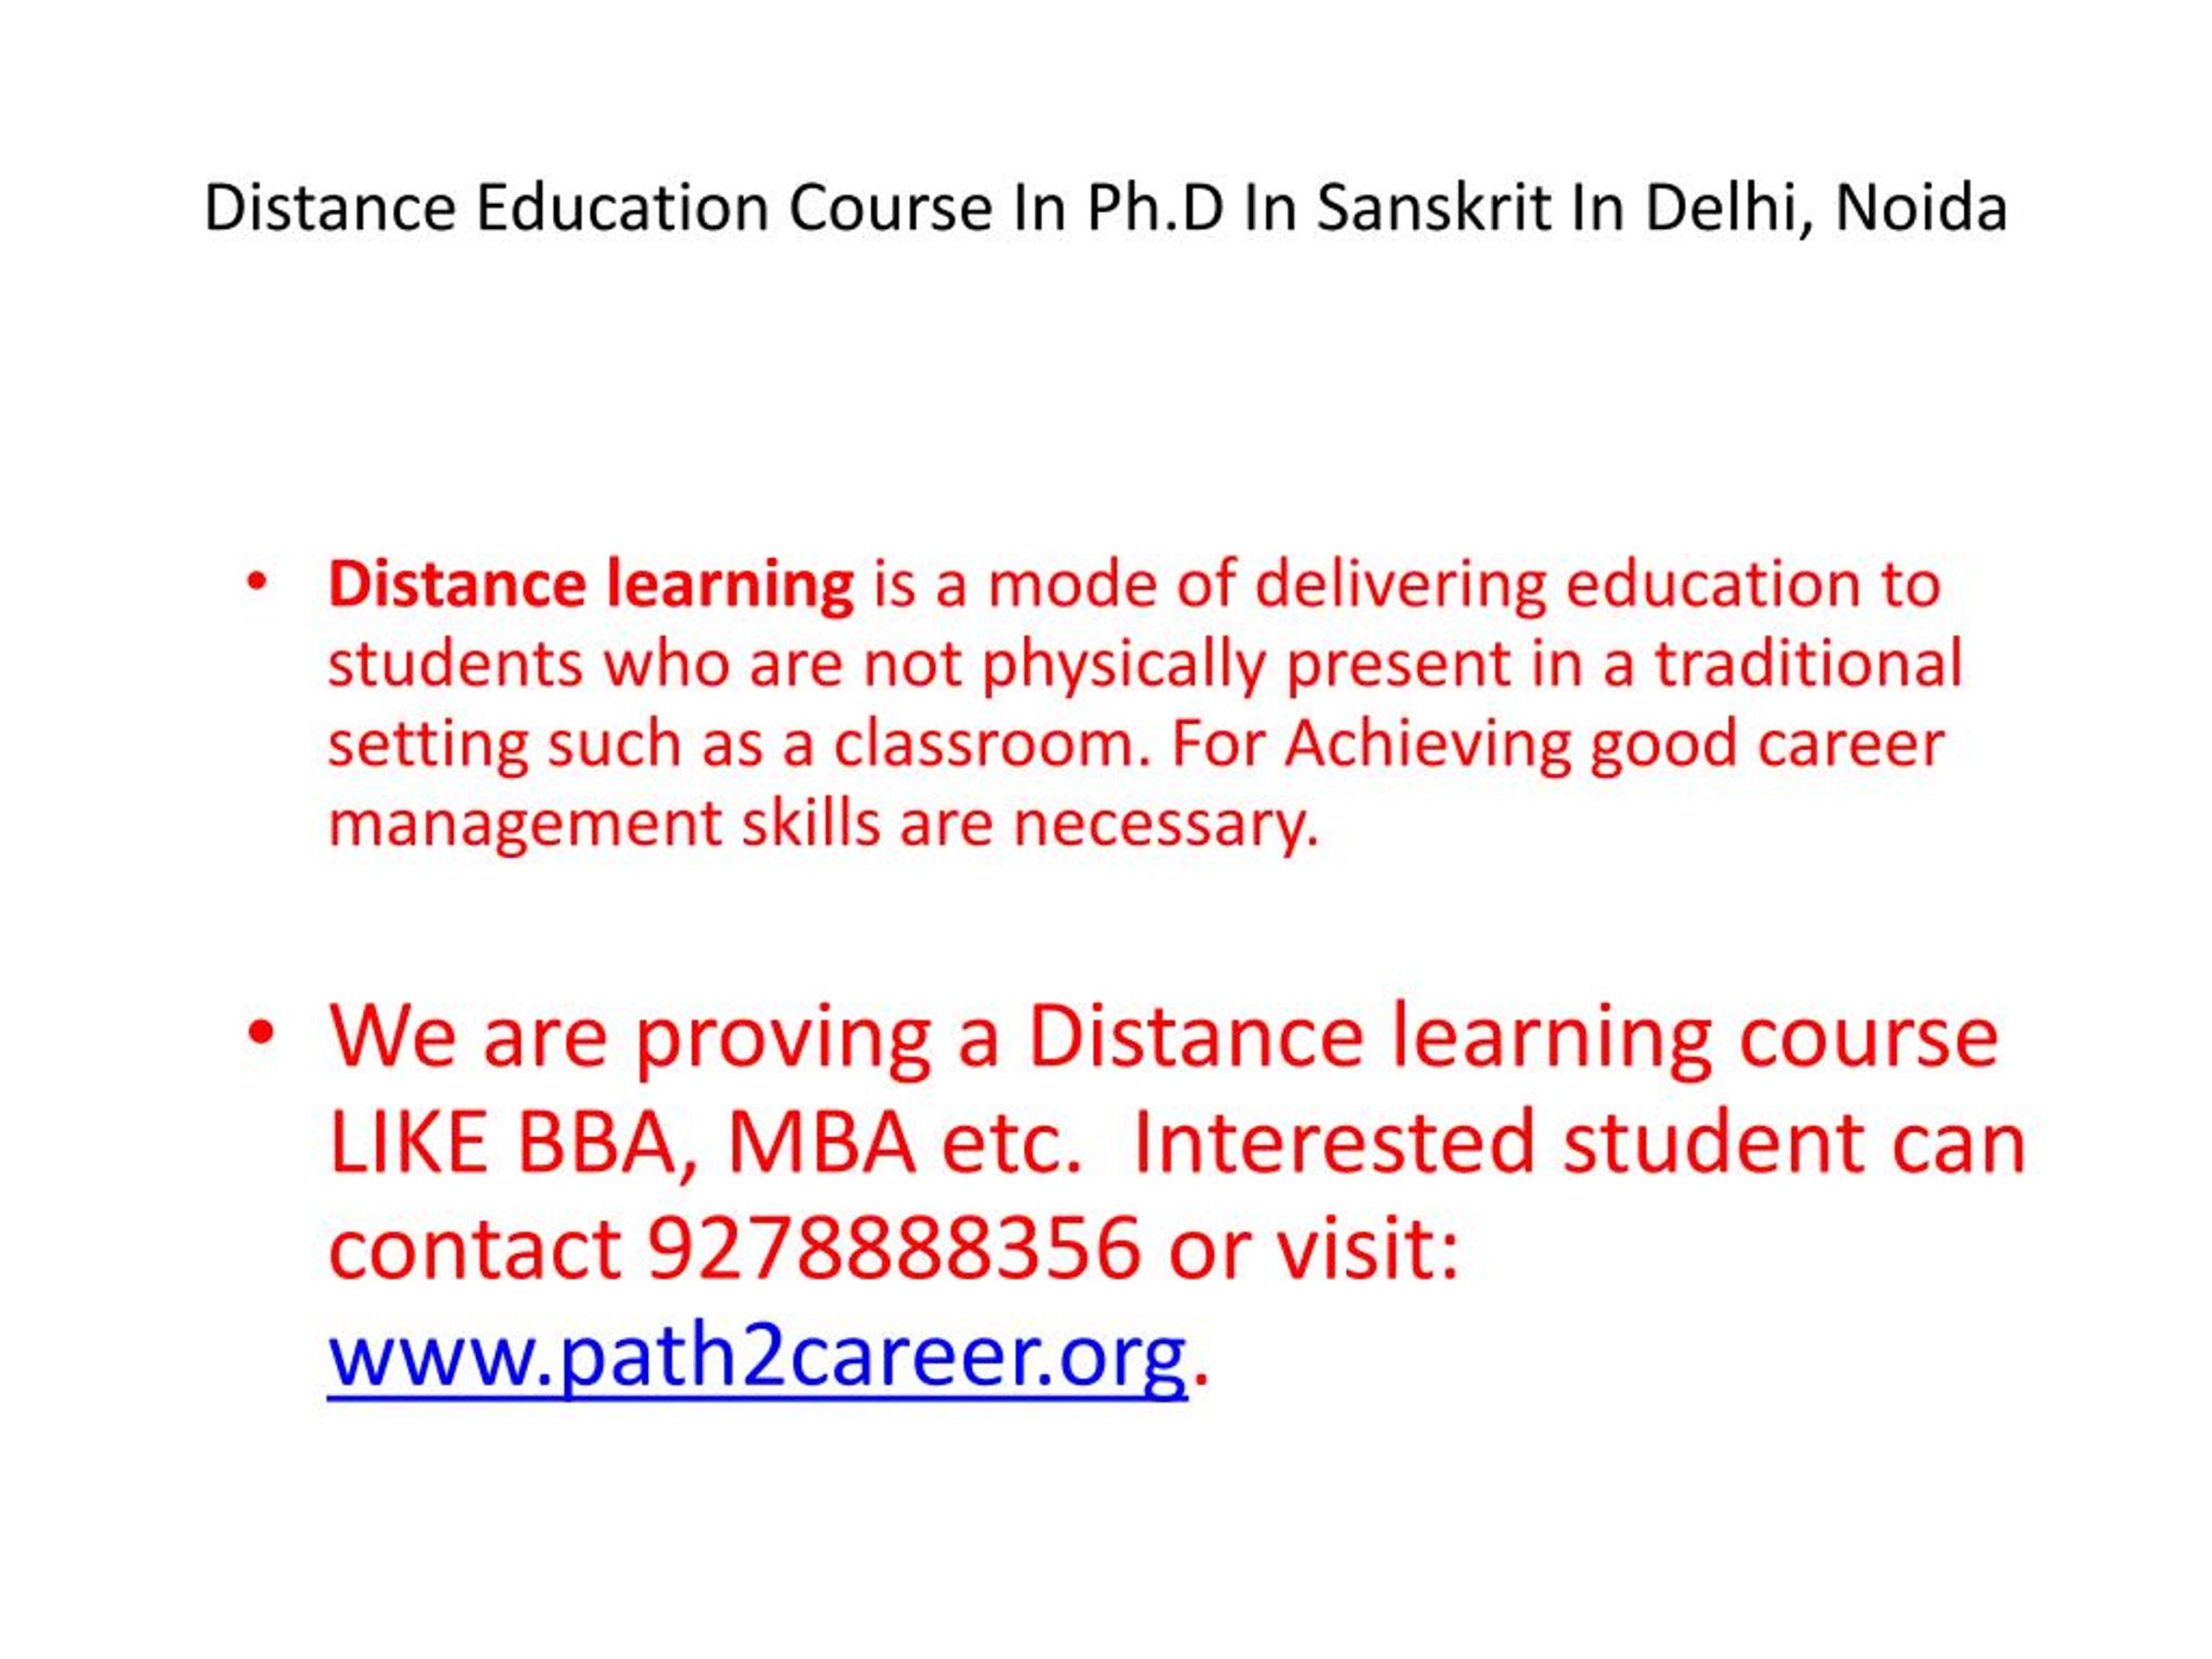 phd in sanskrit from distance education